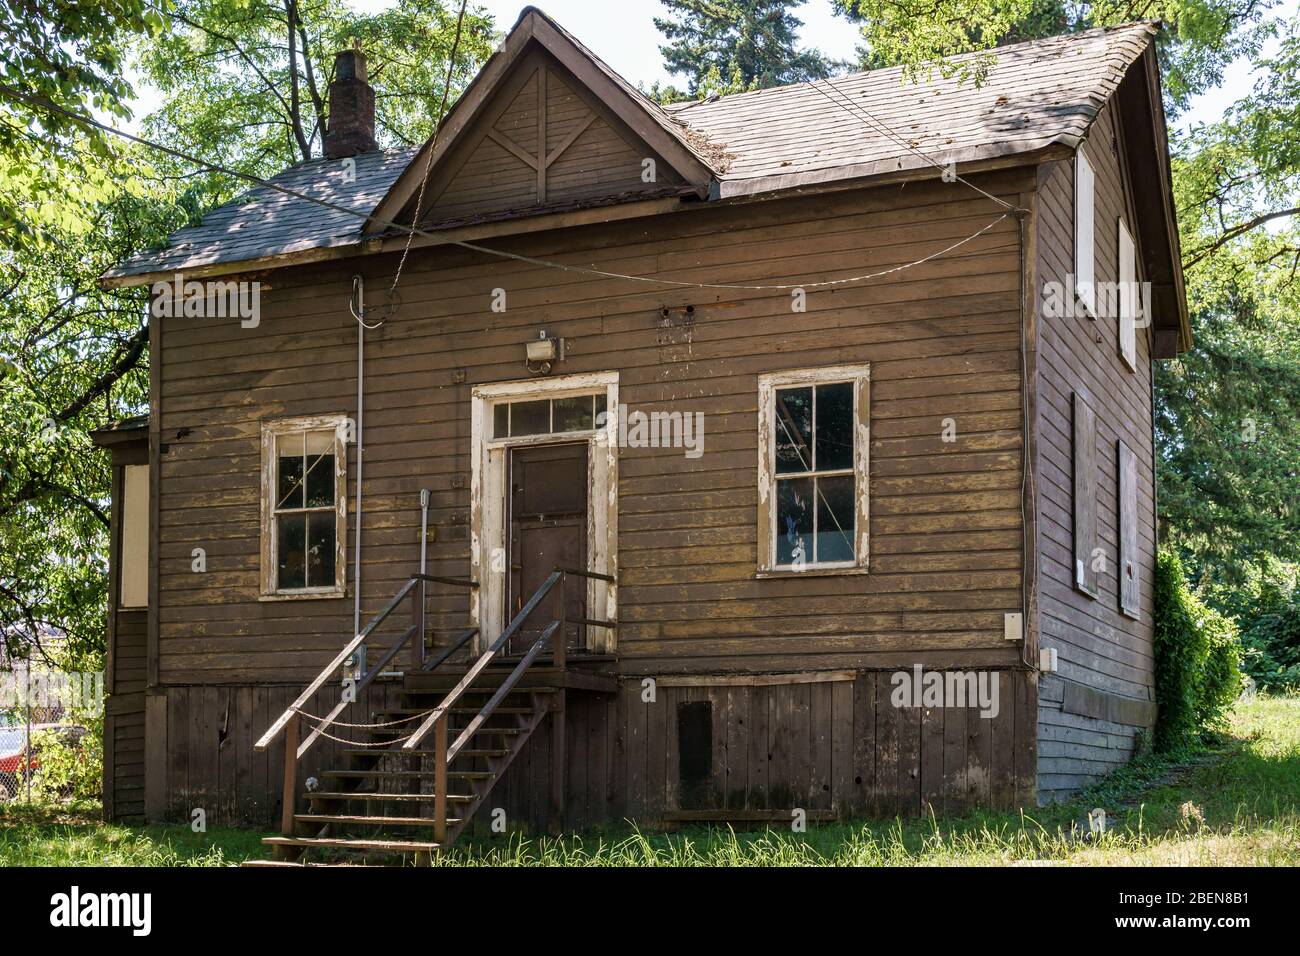 NEW WESTMINSTER, CANADA - JUNE 26, 2019: old and Abandoned wooden house in city center. Stock Photo